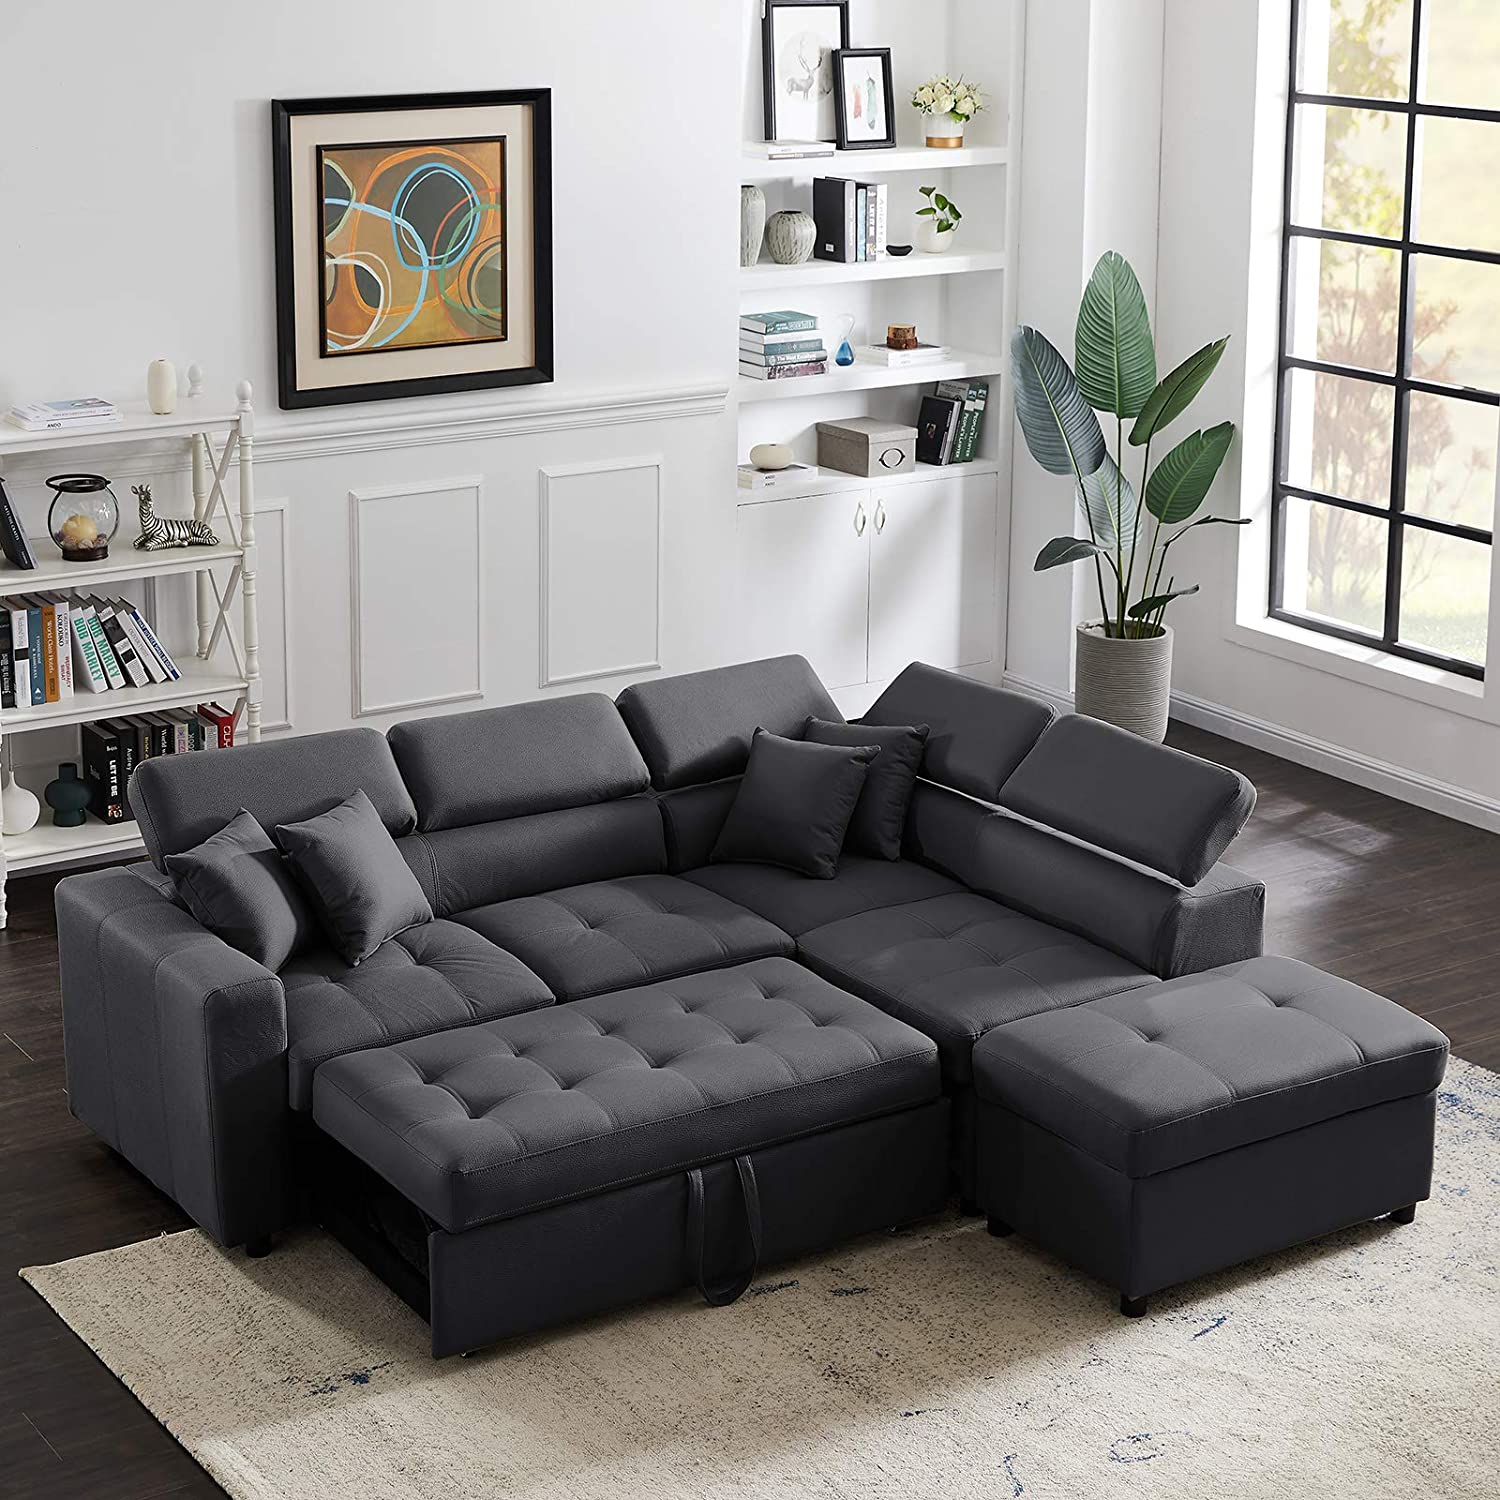 Modern Convertible Sectional Sofa Black Upholstery Adjustable Headrests Attractive Contemporary Furniture For Small Spaces Multipurpose Design 